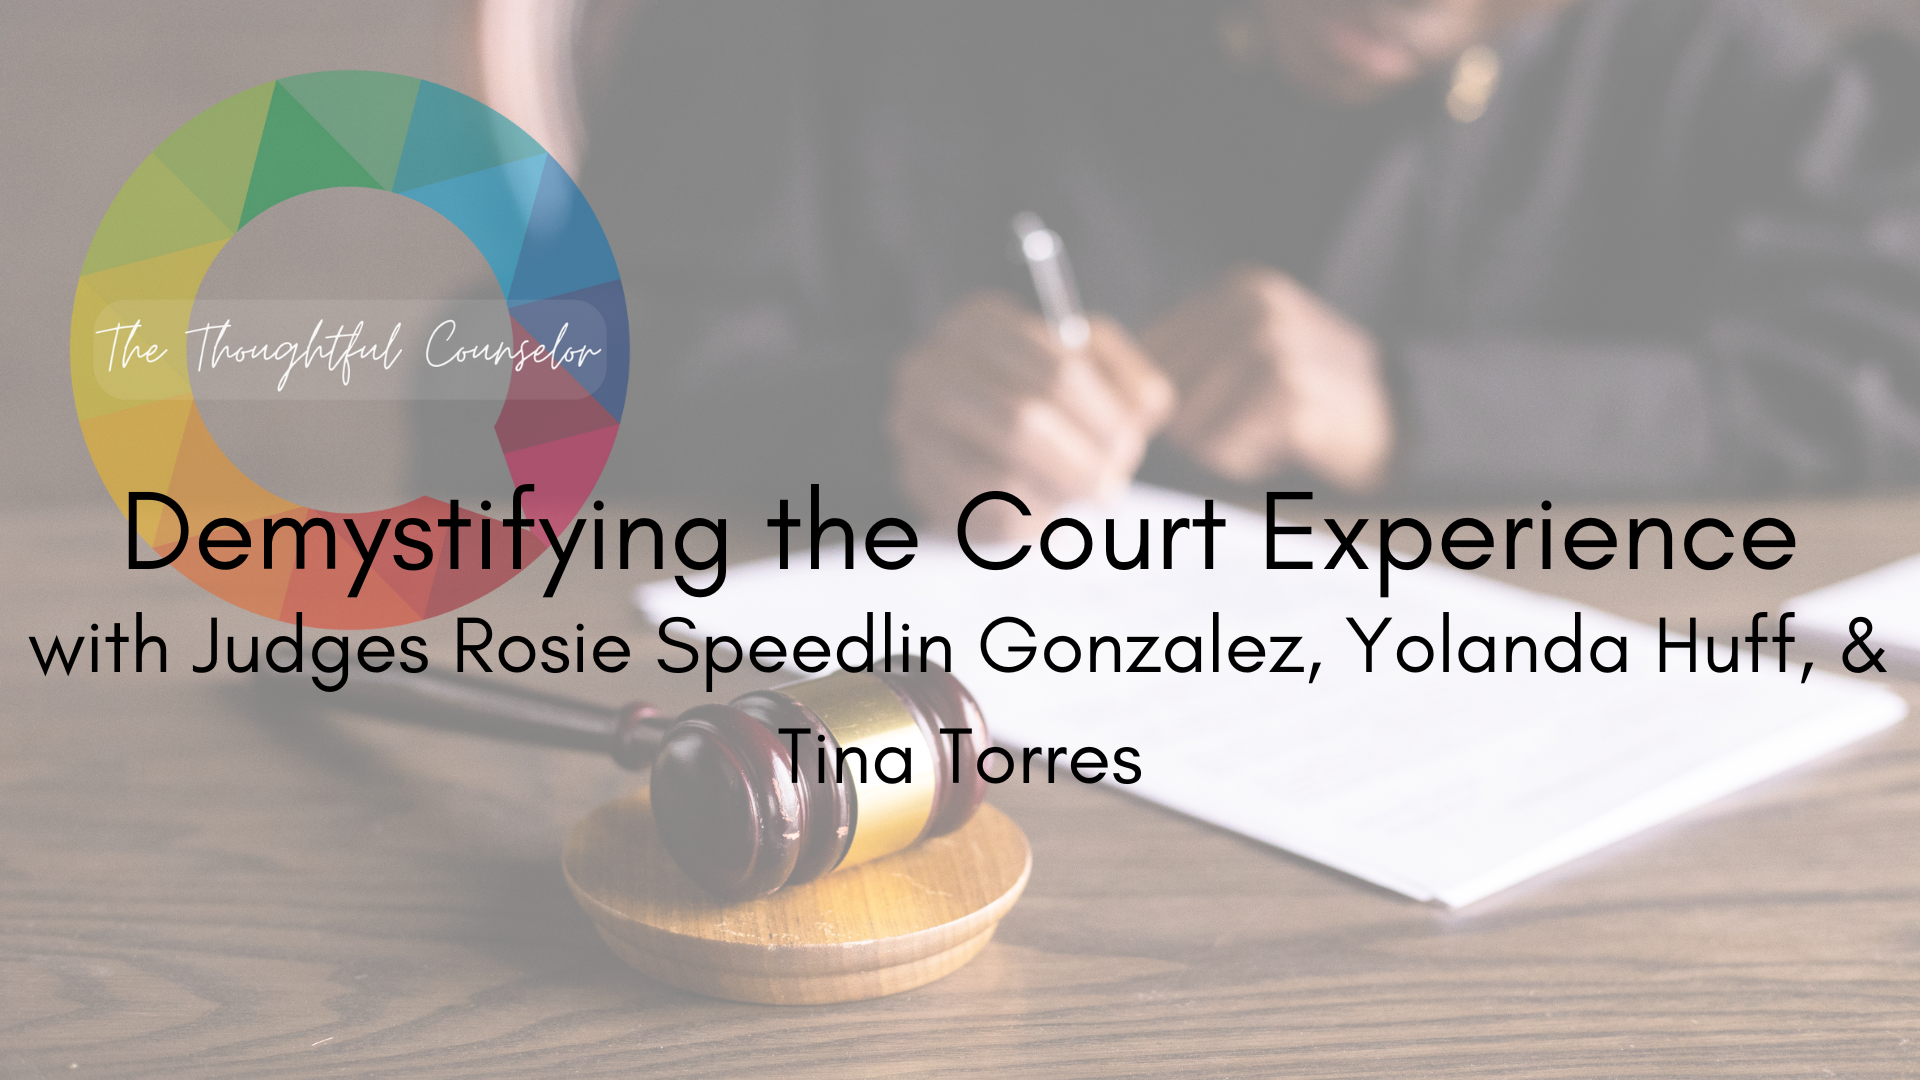 Demystifying the Court Experience